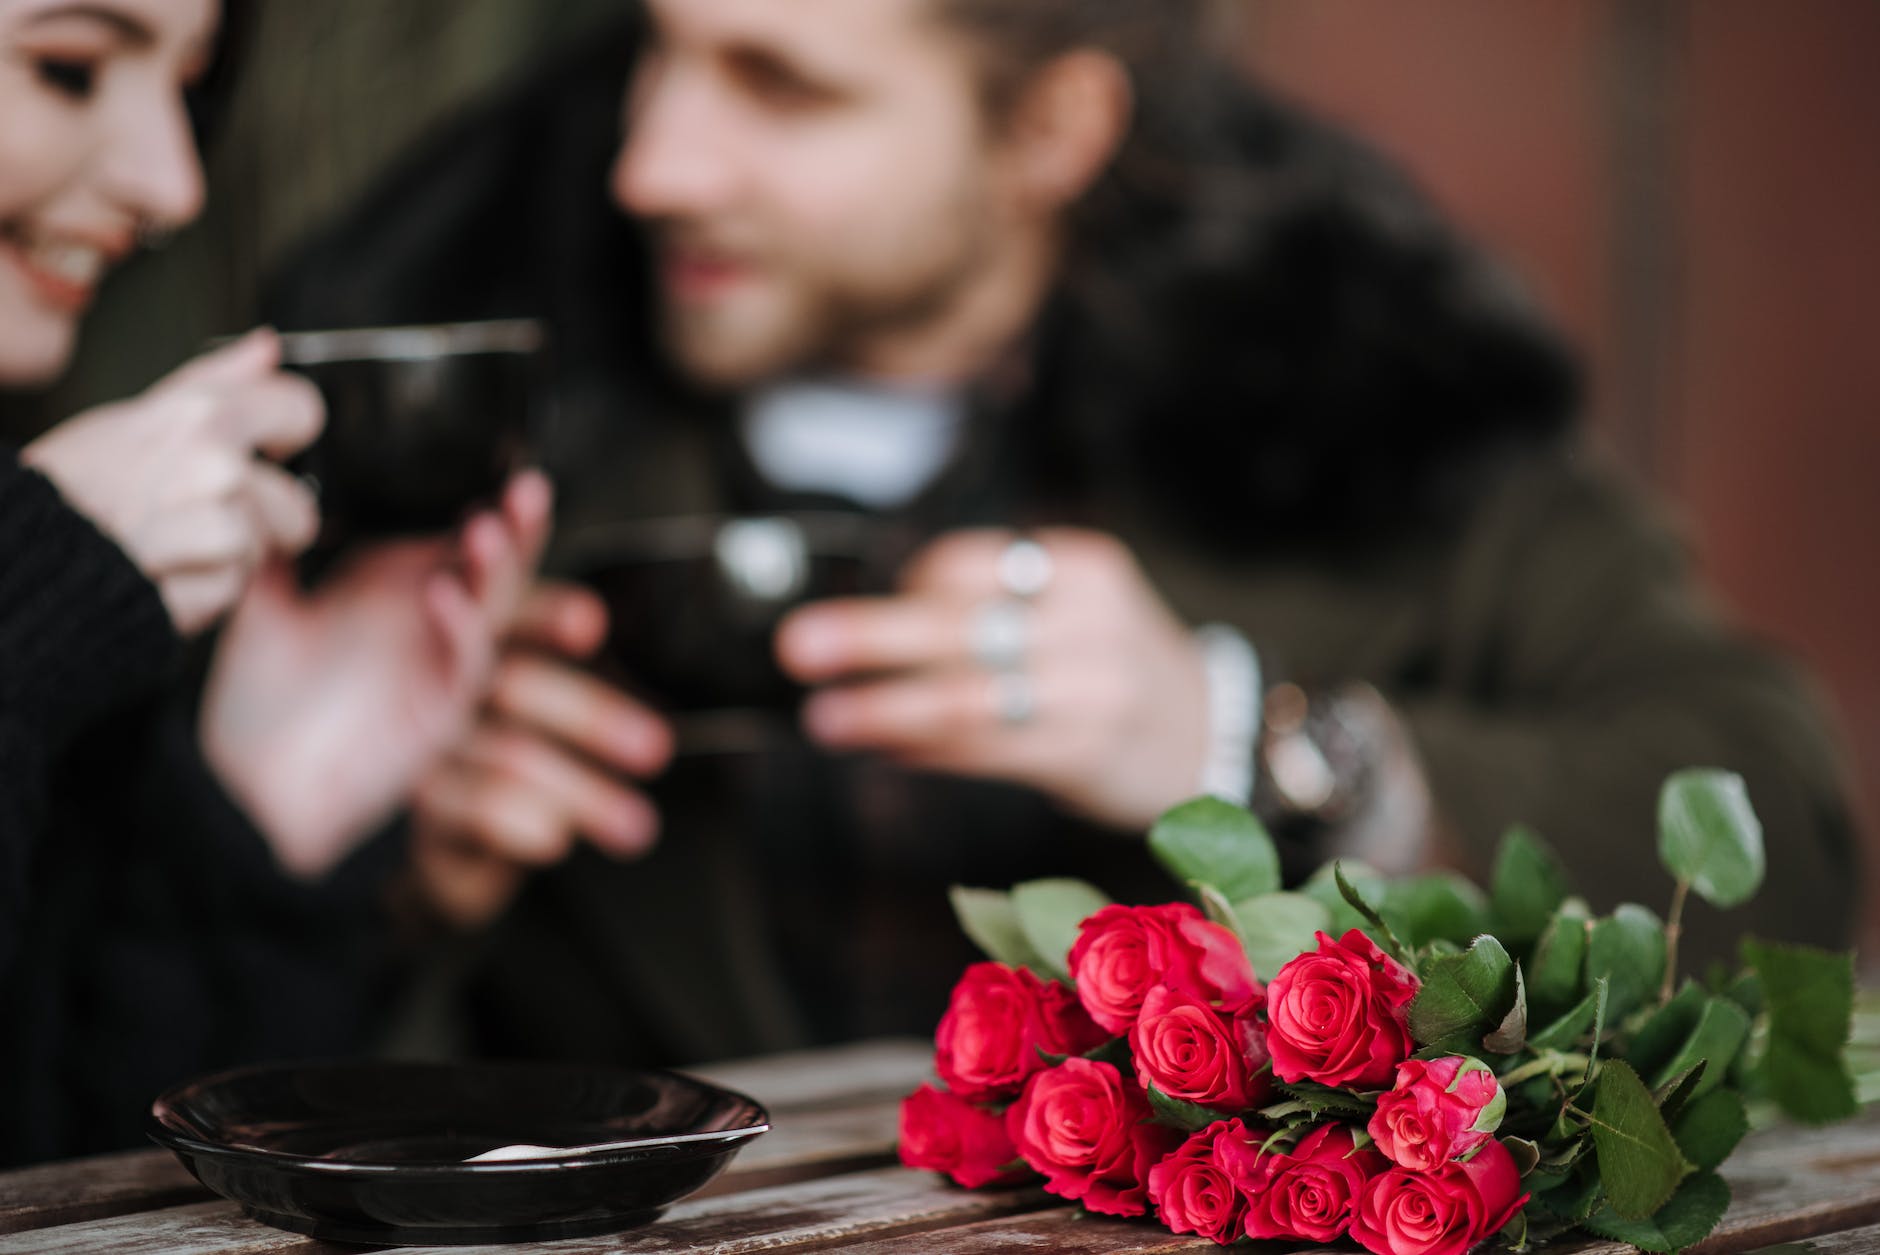 7 Romantic Date Night Ideas At Home